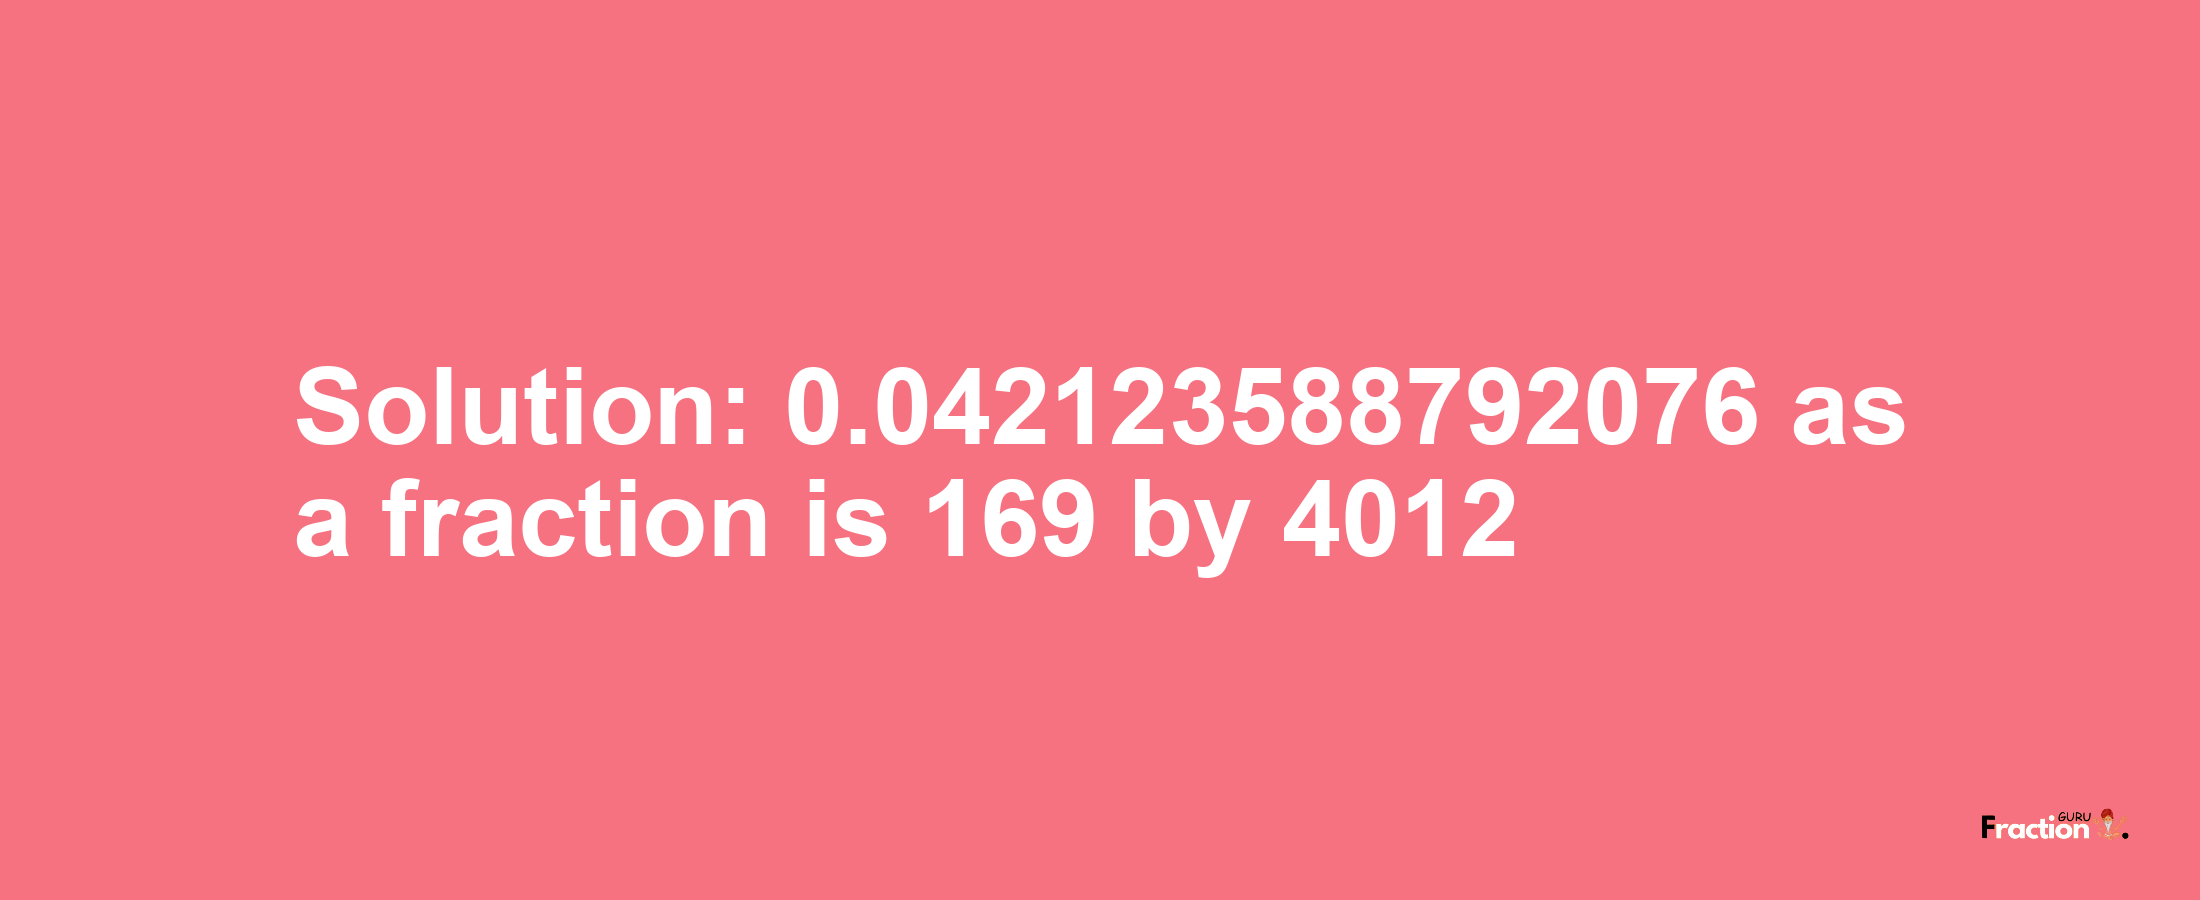 Solution:0.042123588792076 as a fraction is 169/4012